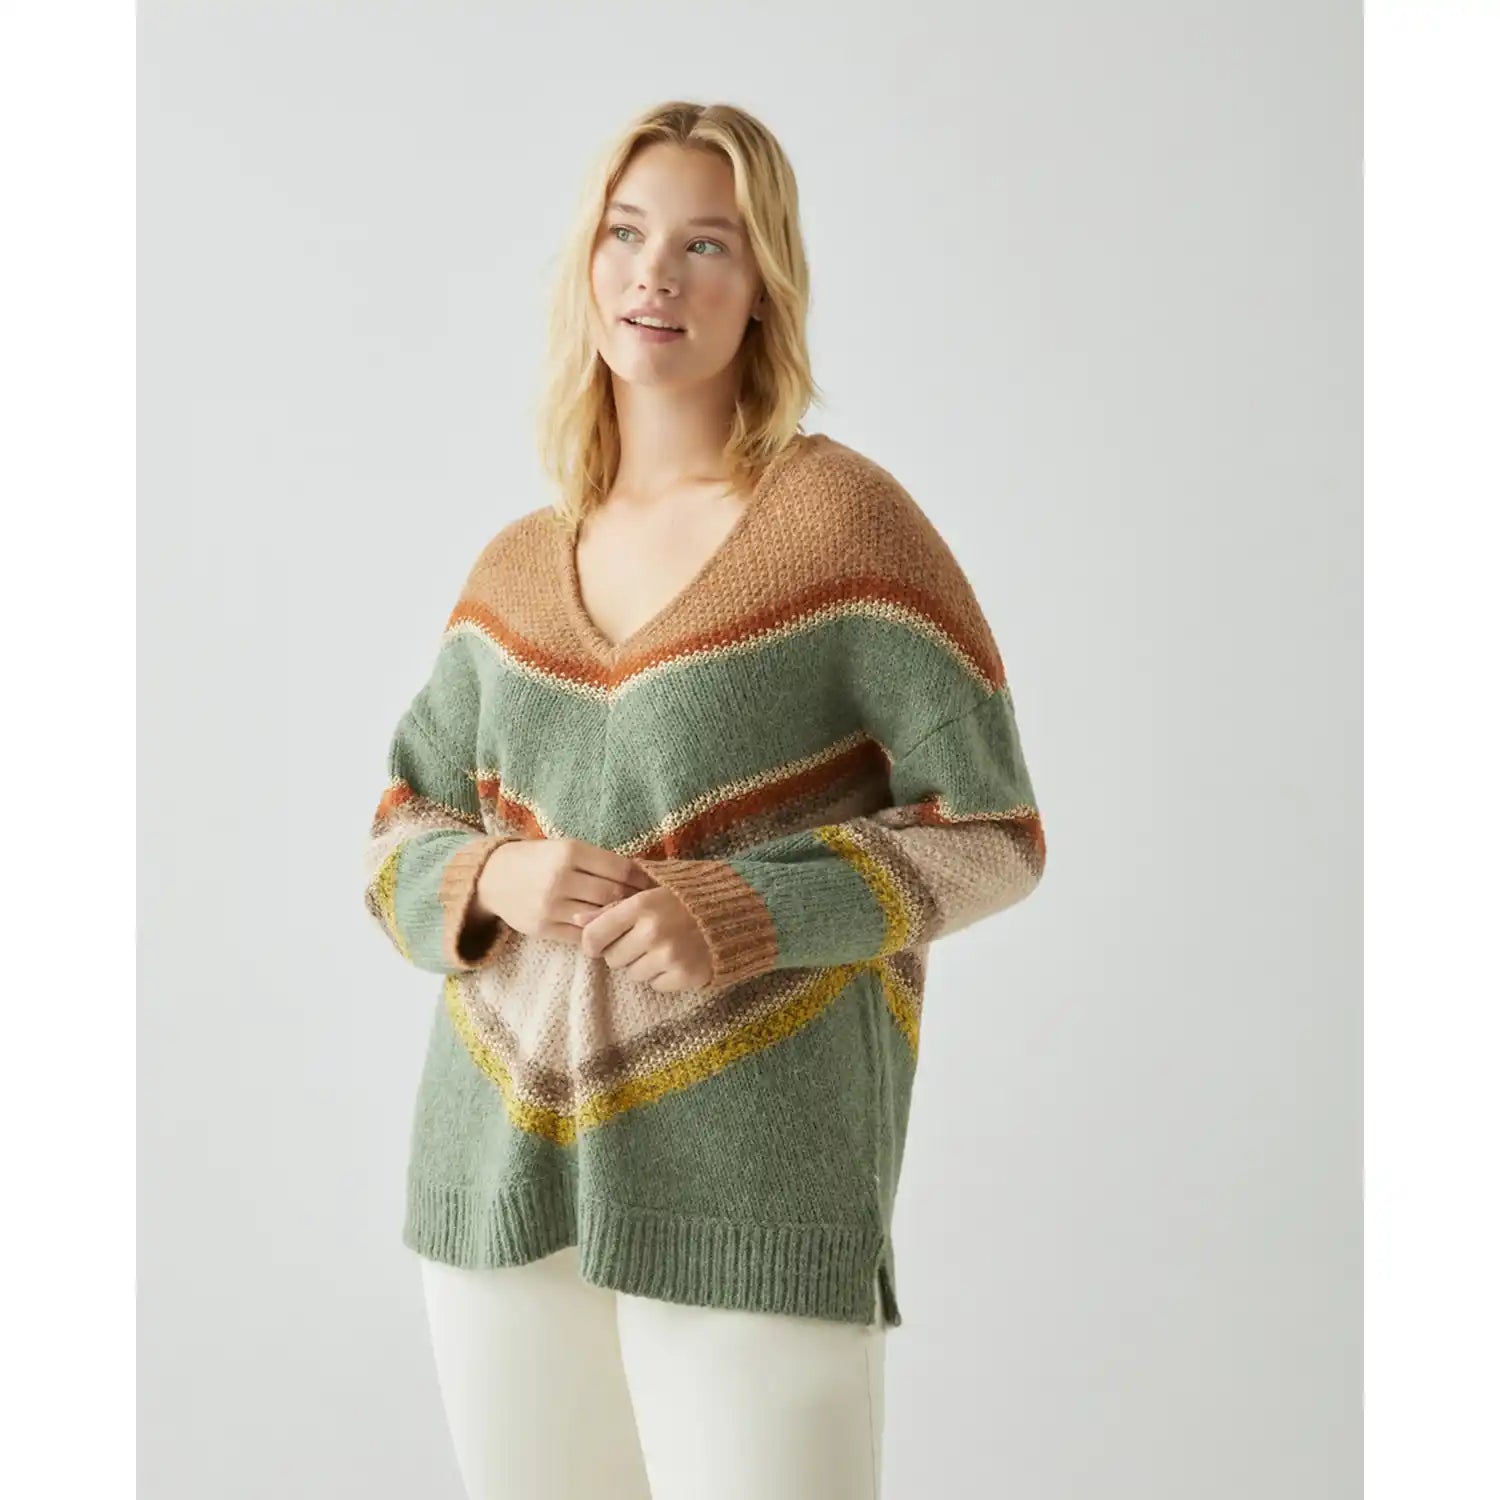 Couchel Multicolored Sweater - Multi 1 Shaws Department Stores